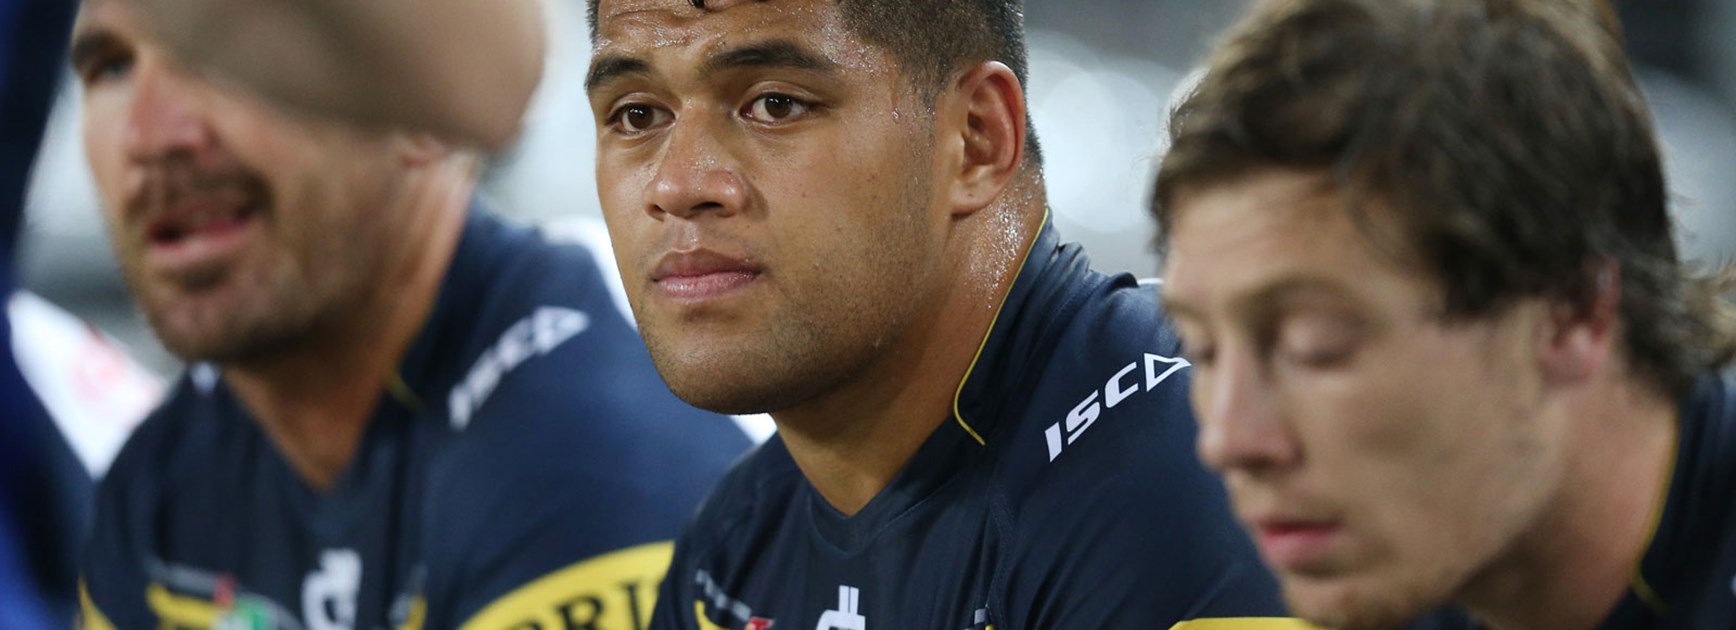 John Asiata has signed a two-year contract extension to remain at the Cowboys until the end of the 2017 season.